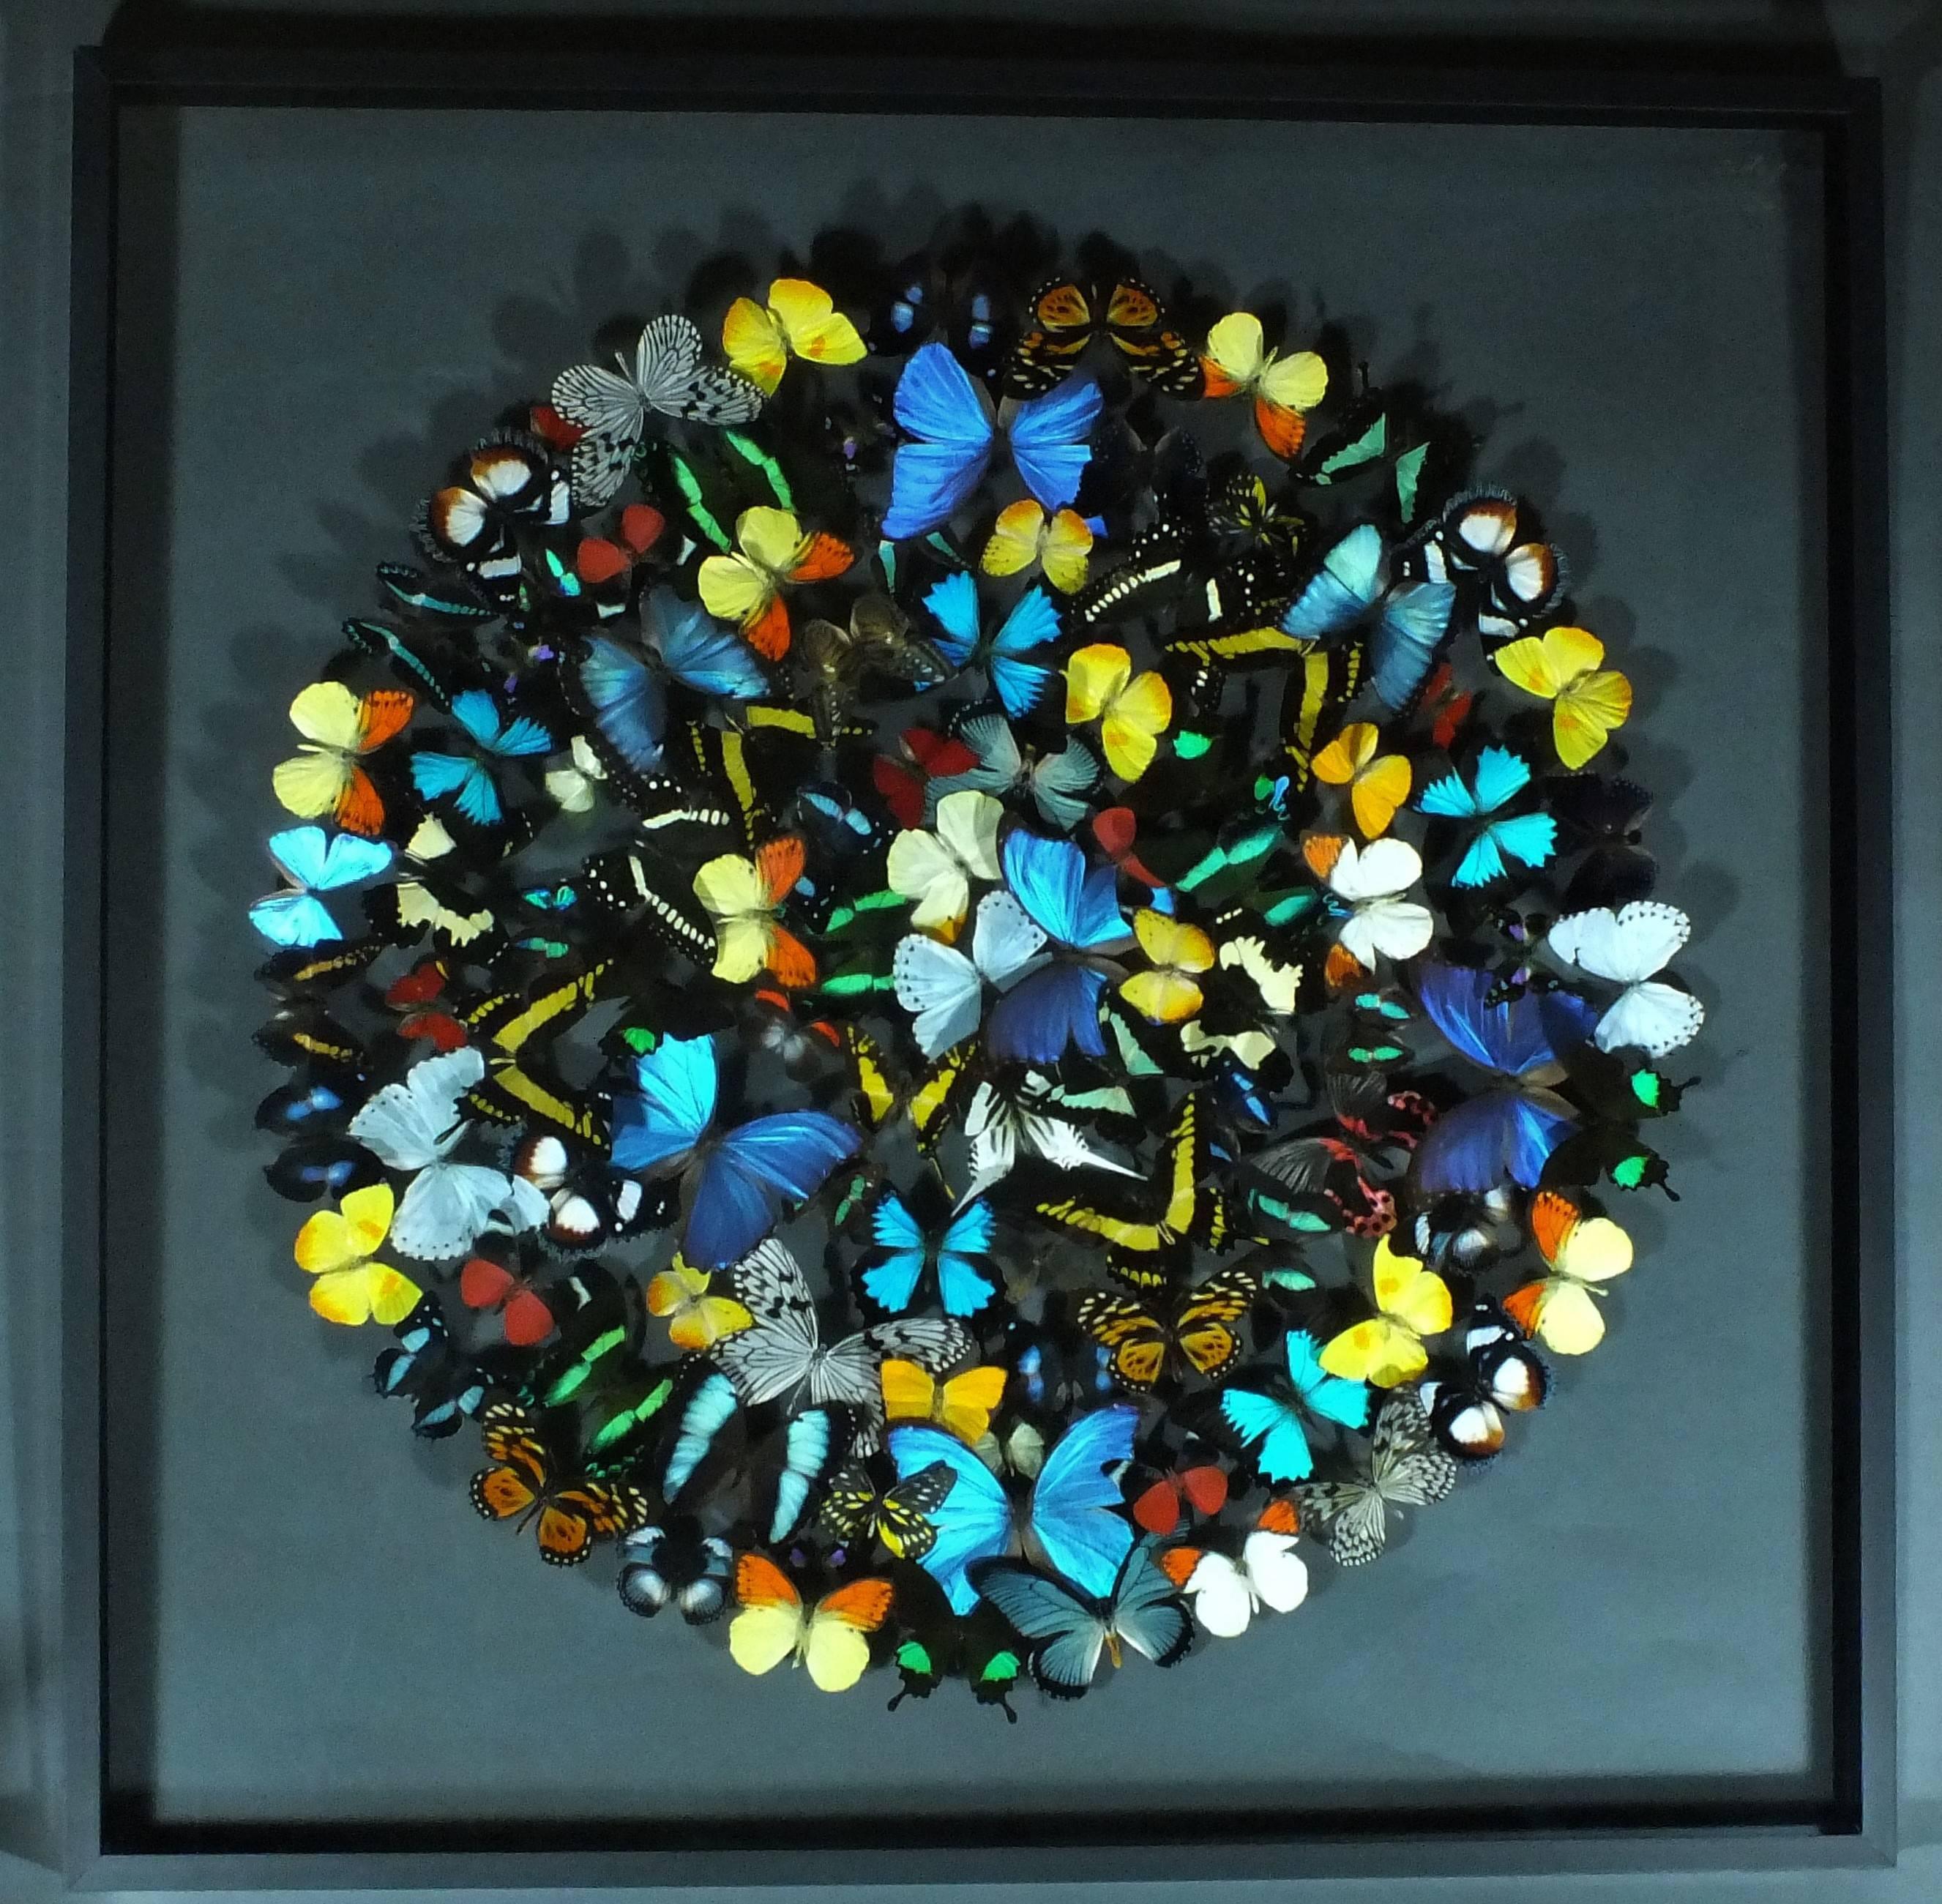 Dried butterflies of different species mounted onto a double glass frame. Signed Violo on the top right.